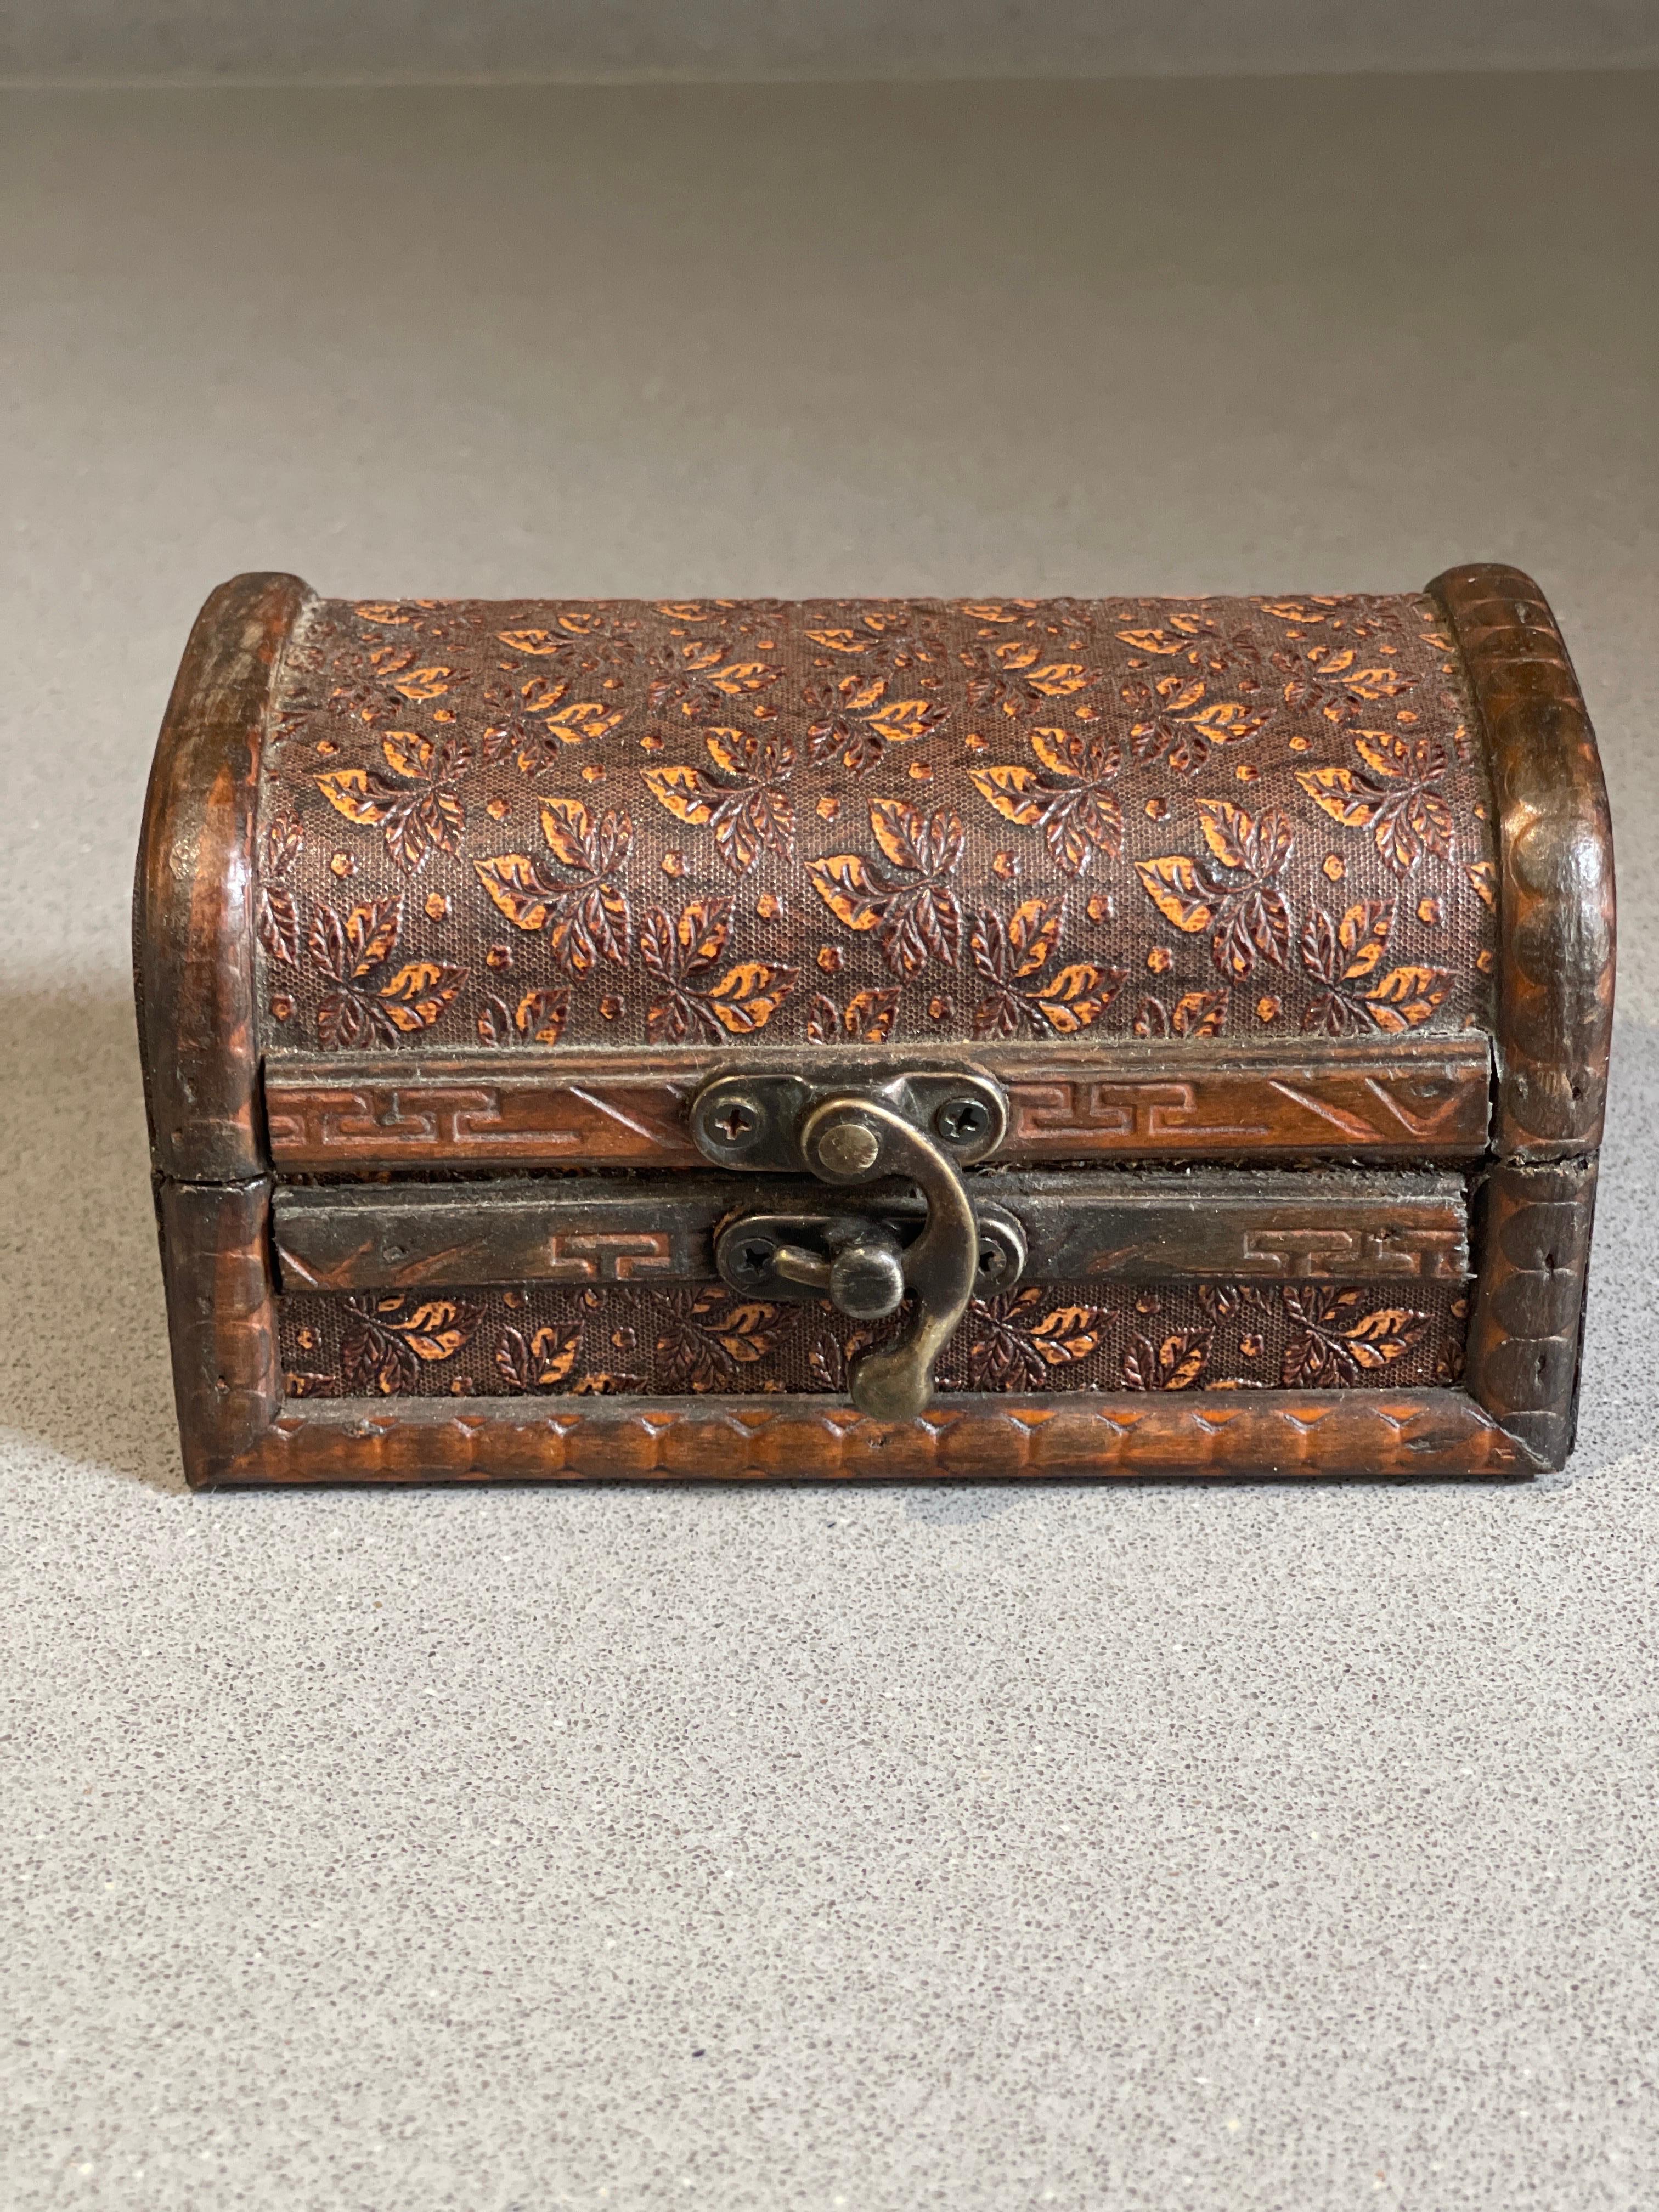 A handmade wooden jewellery box with a lid and lock, it is perfectly designed and created in a suitable size for keeping valuables inside. The top of this box has leaf patterns and leather texture.
It can also be a decorative object for any bedroom